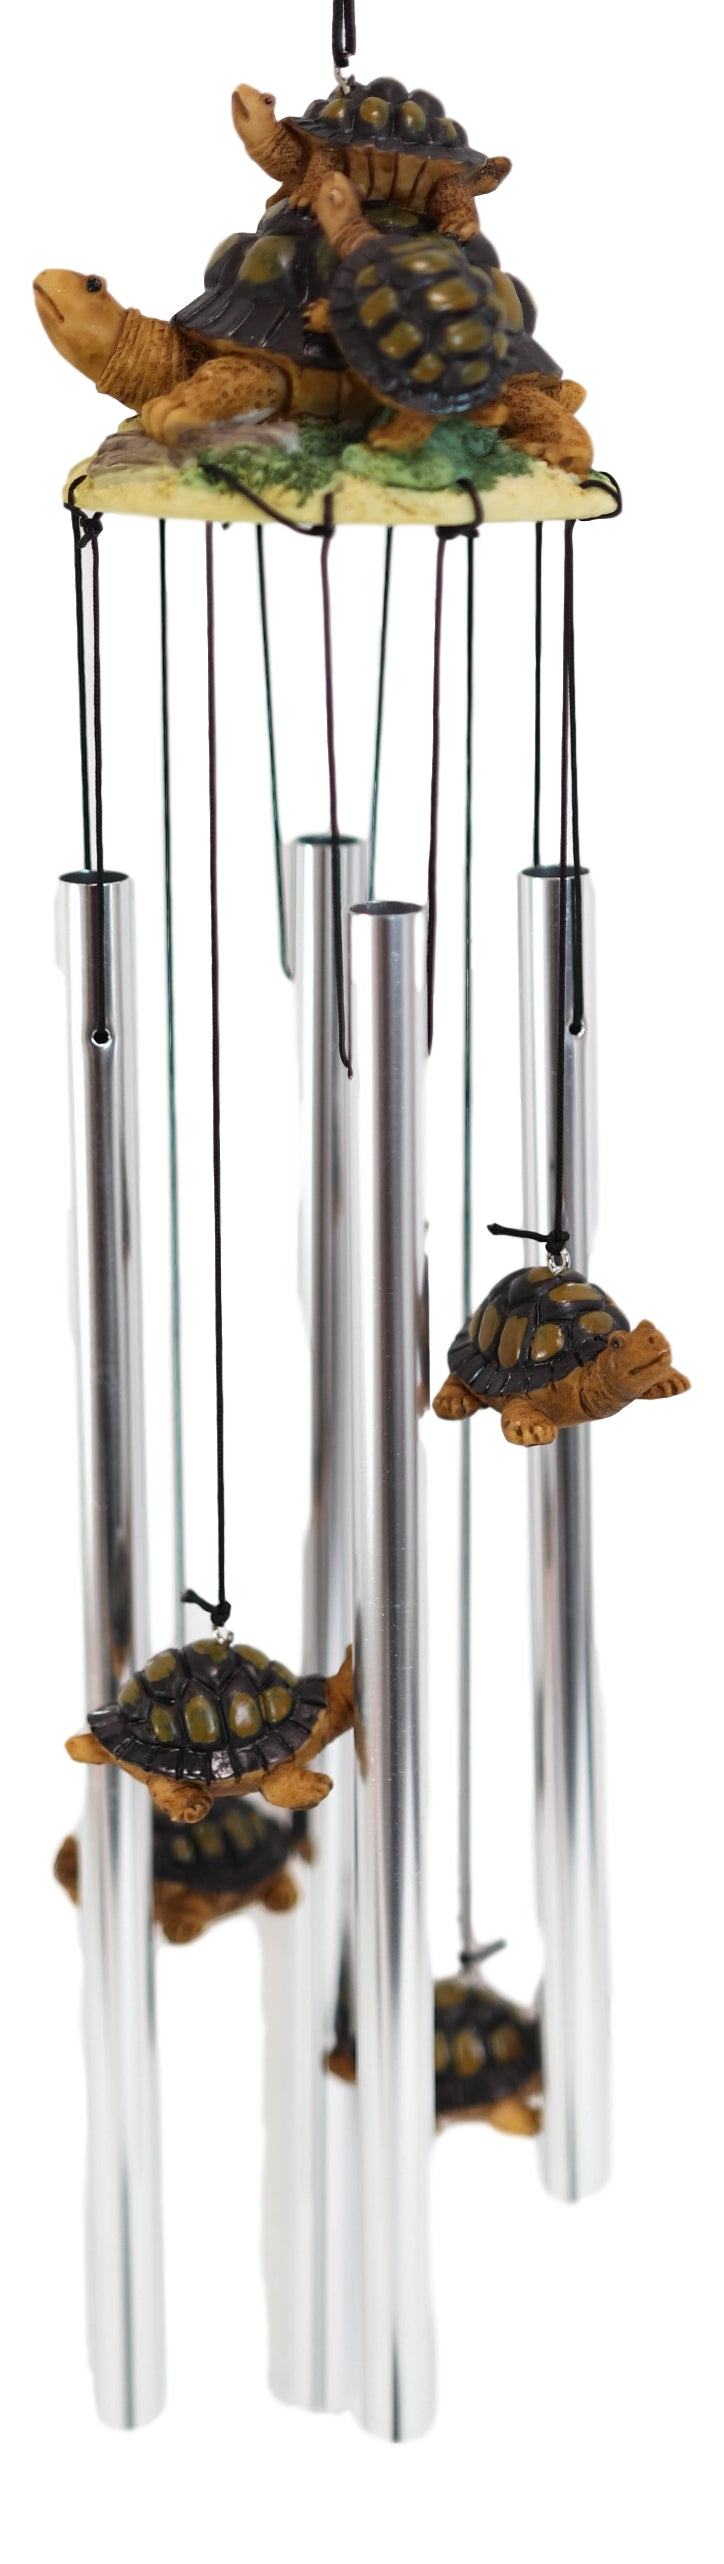 Ebros Reptile Brown Giant Tortoise Mother Piggybacking Hatchling Wind Chime